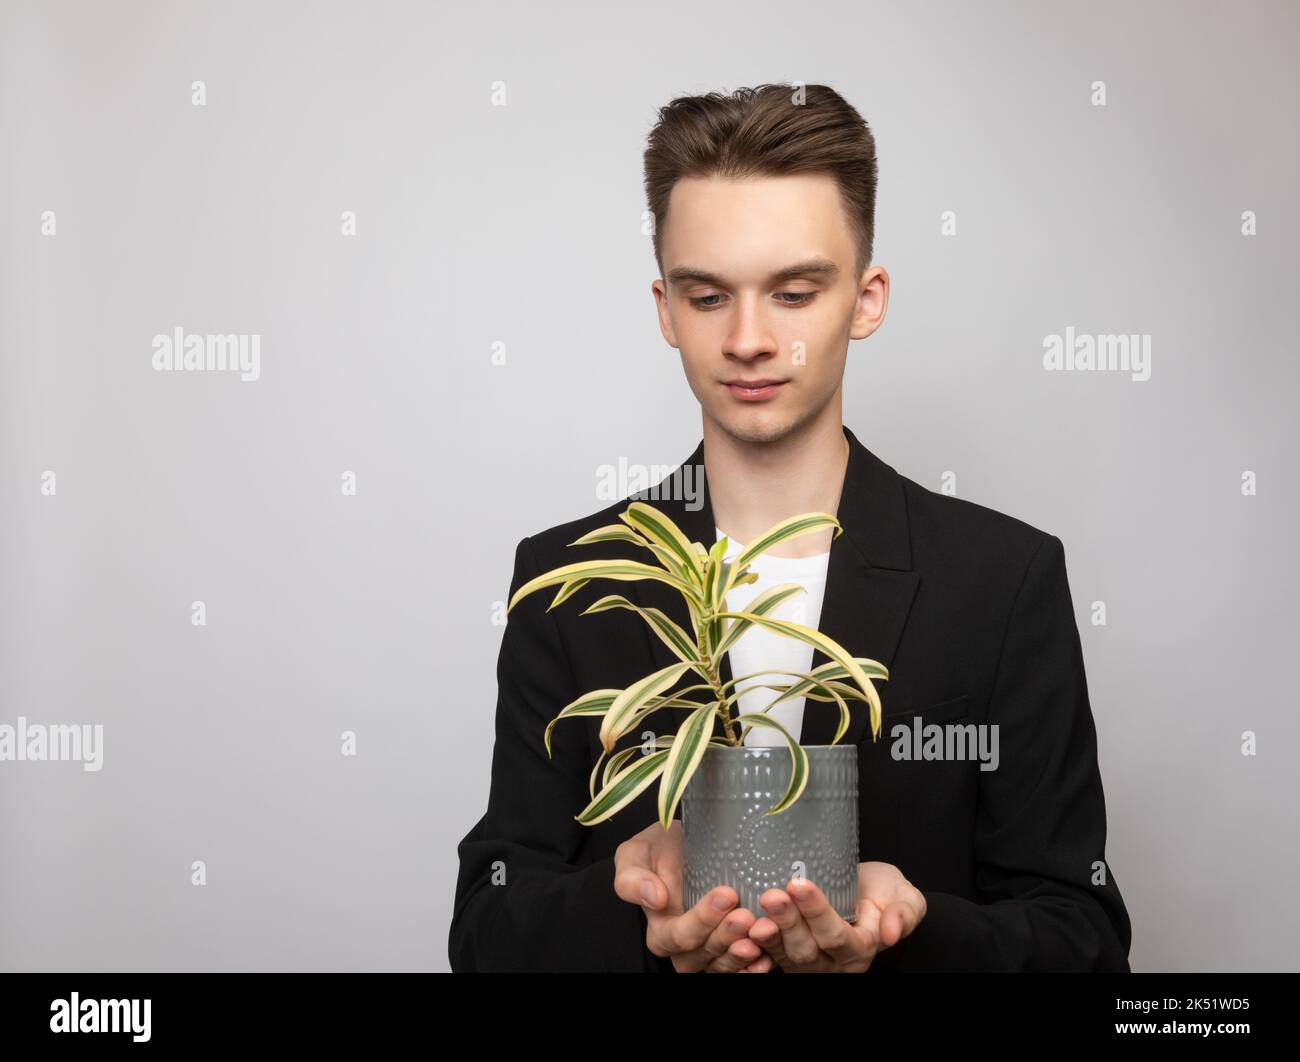 Portrait of elegant young man wearing black  suit holding potted house plant. Studio shot on gray background Stock Photo